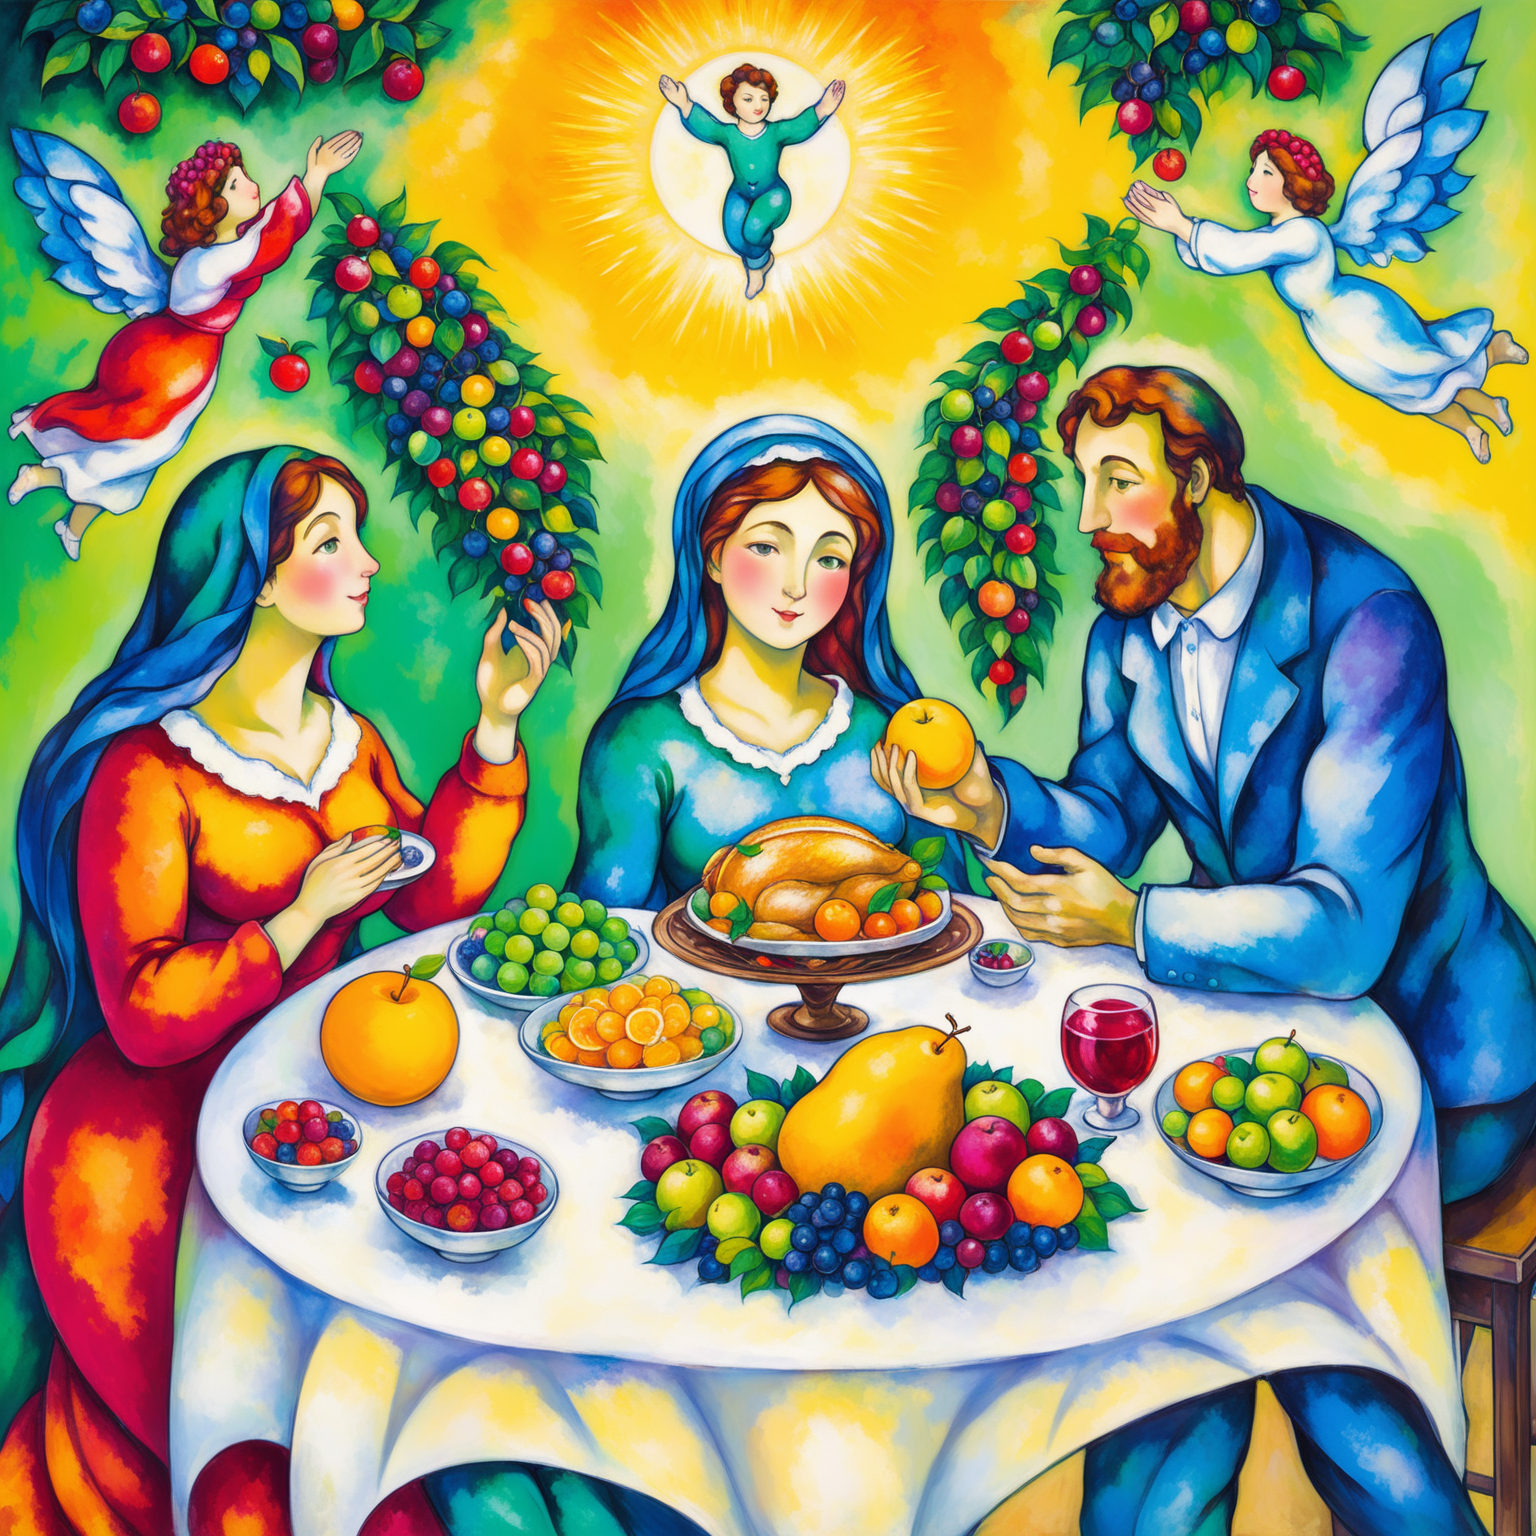 Chagall style  heavenly feast with  a man plus woman  plus child -only fruit - people  more havenley



